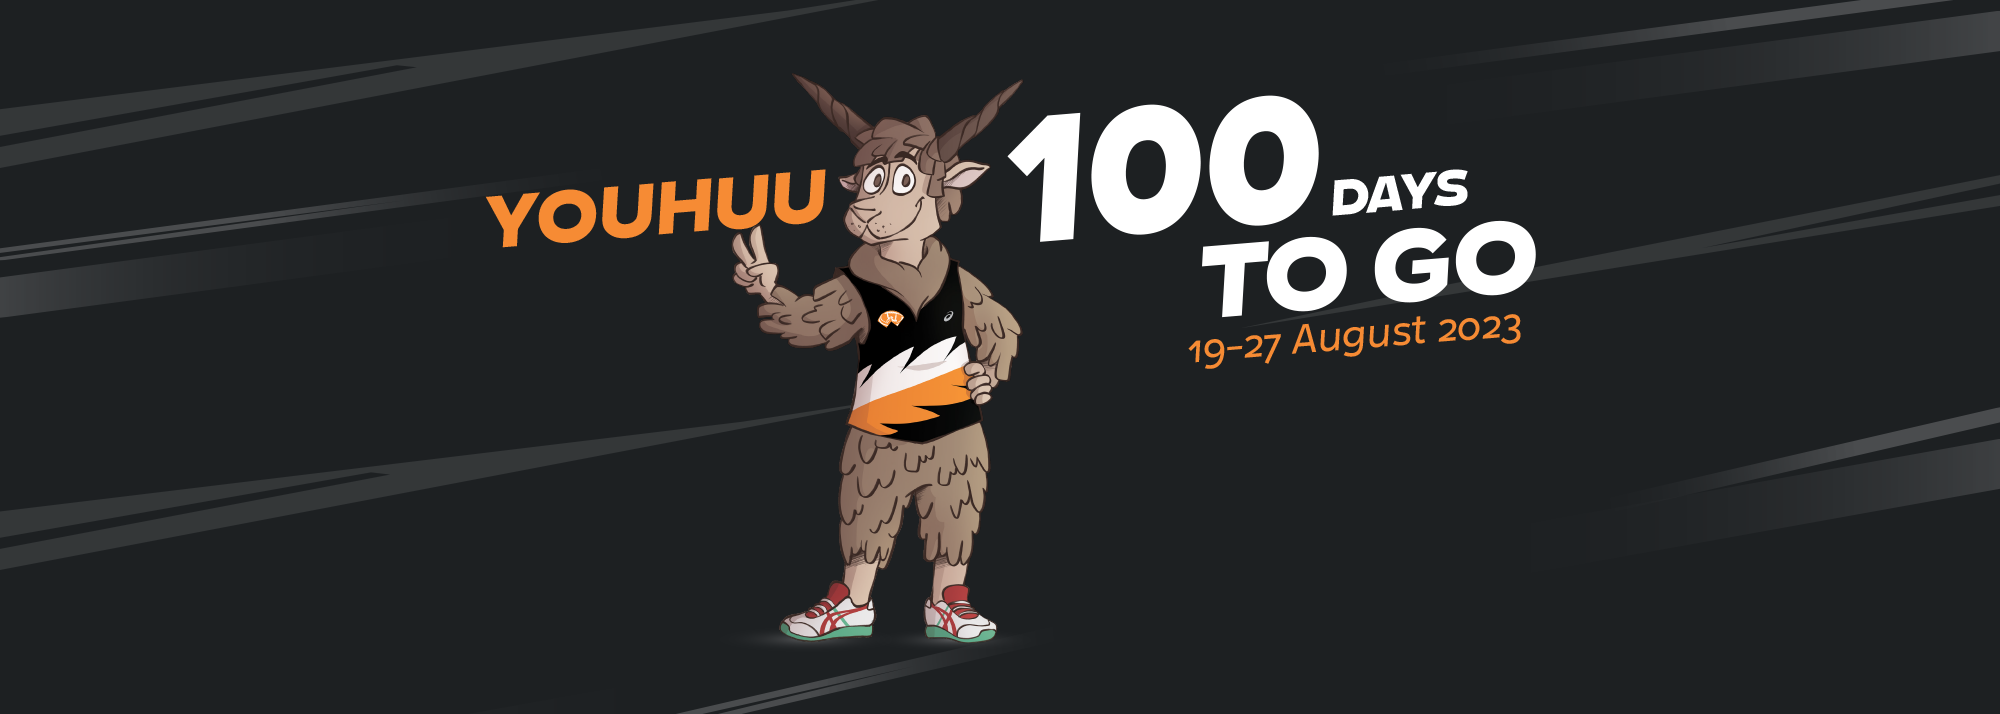 Youhuu, a native Hungarian racka sheep, has been selected as the mascot for the 2023 World Athletics Championships in Budapest, Hungary, and was unveiled to the public at a press event to celebrate 100 days to go to the World Championships. 